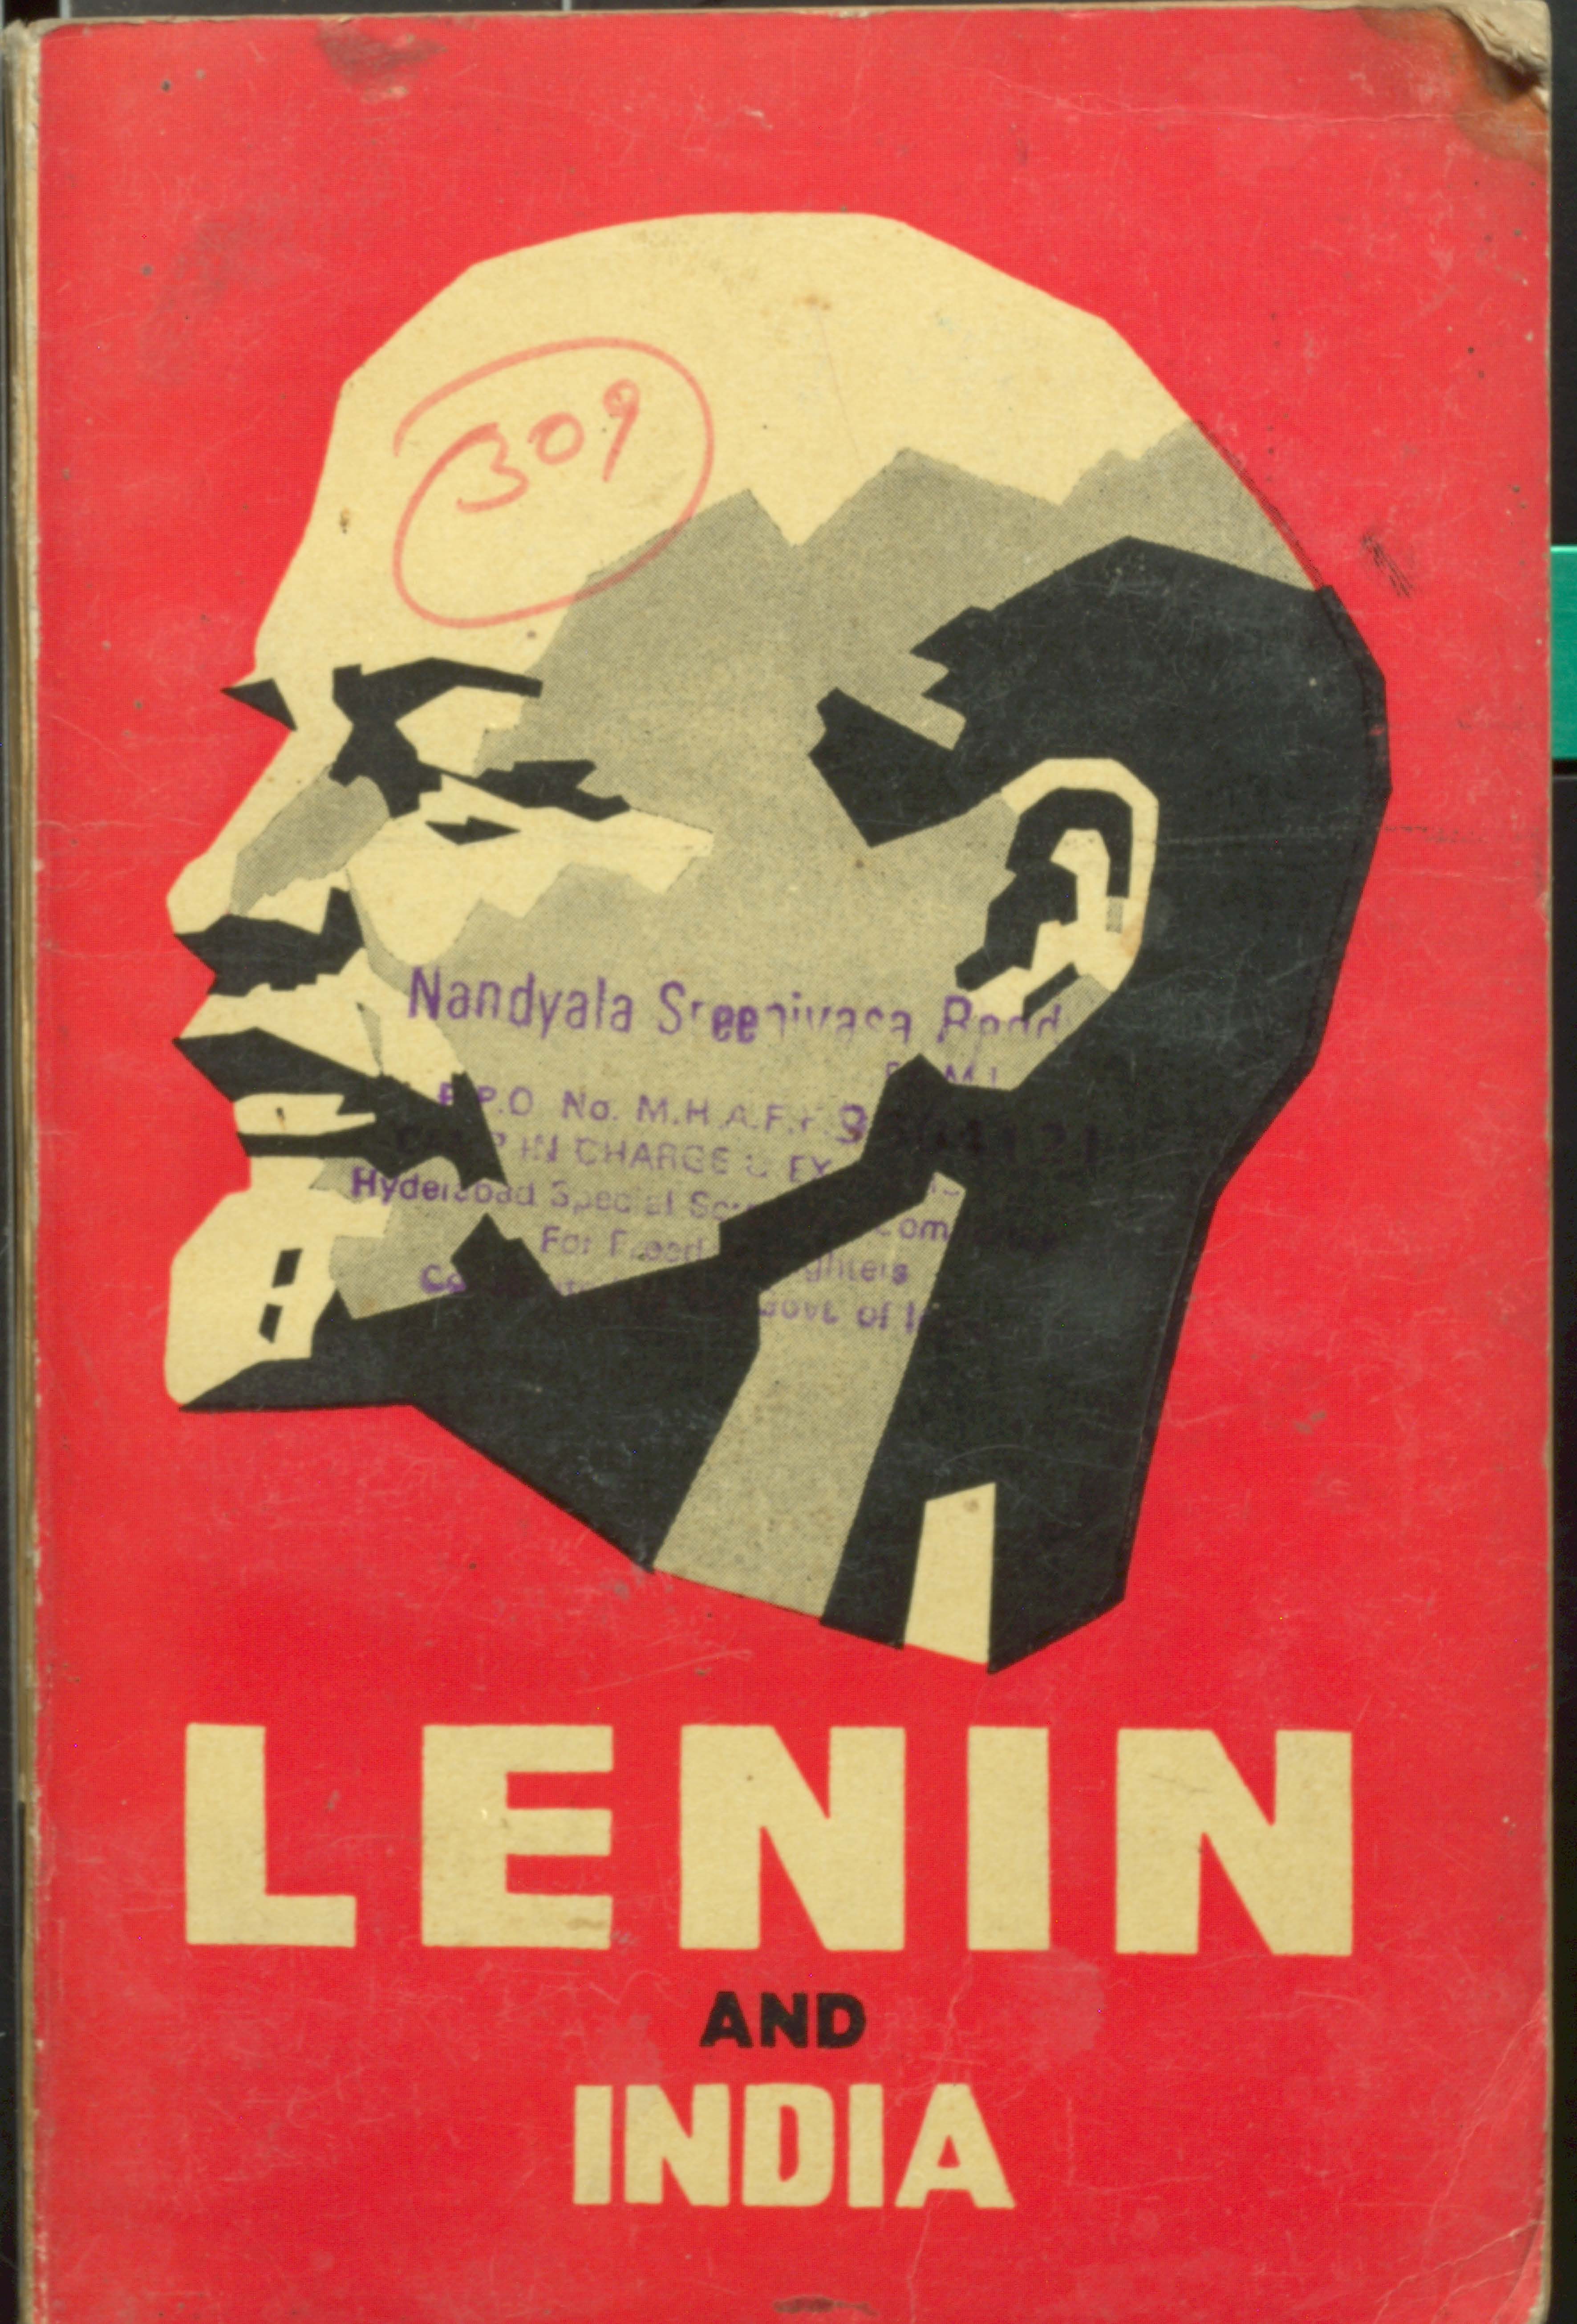 Lenin and india